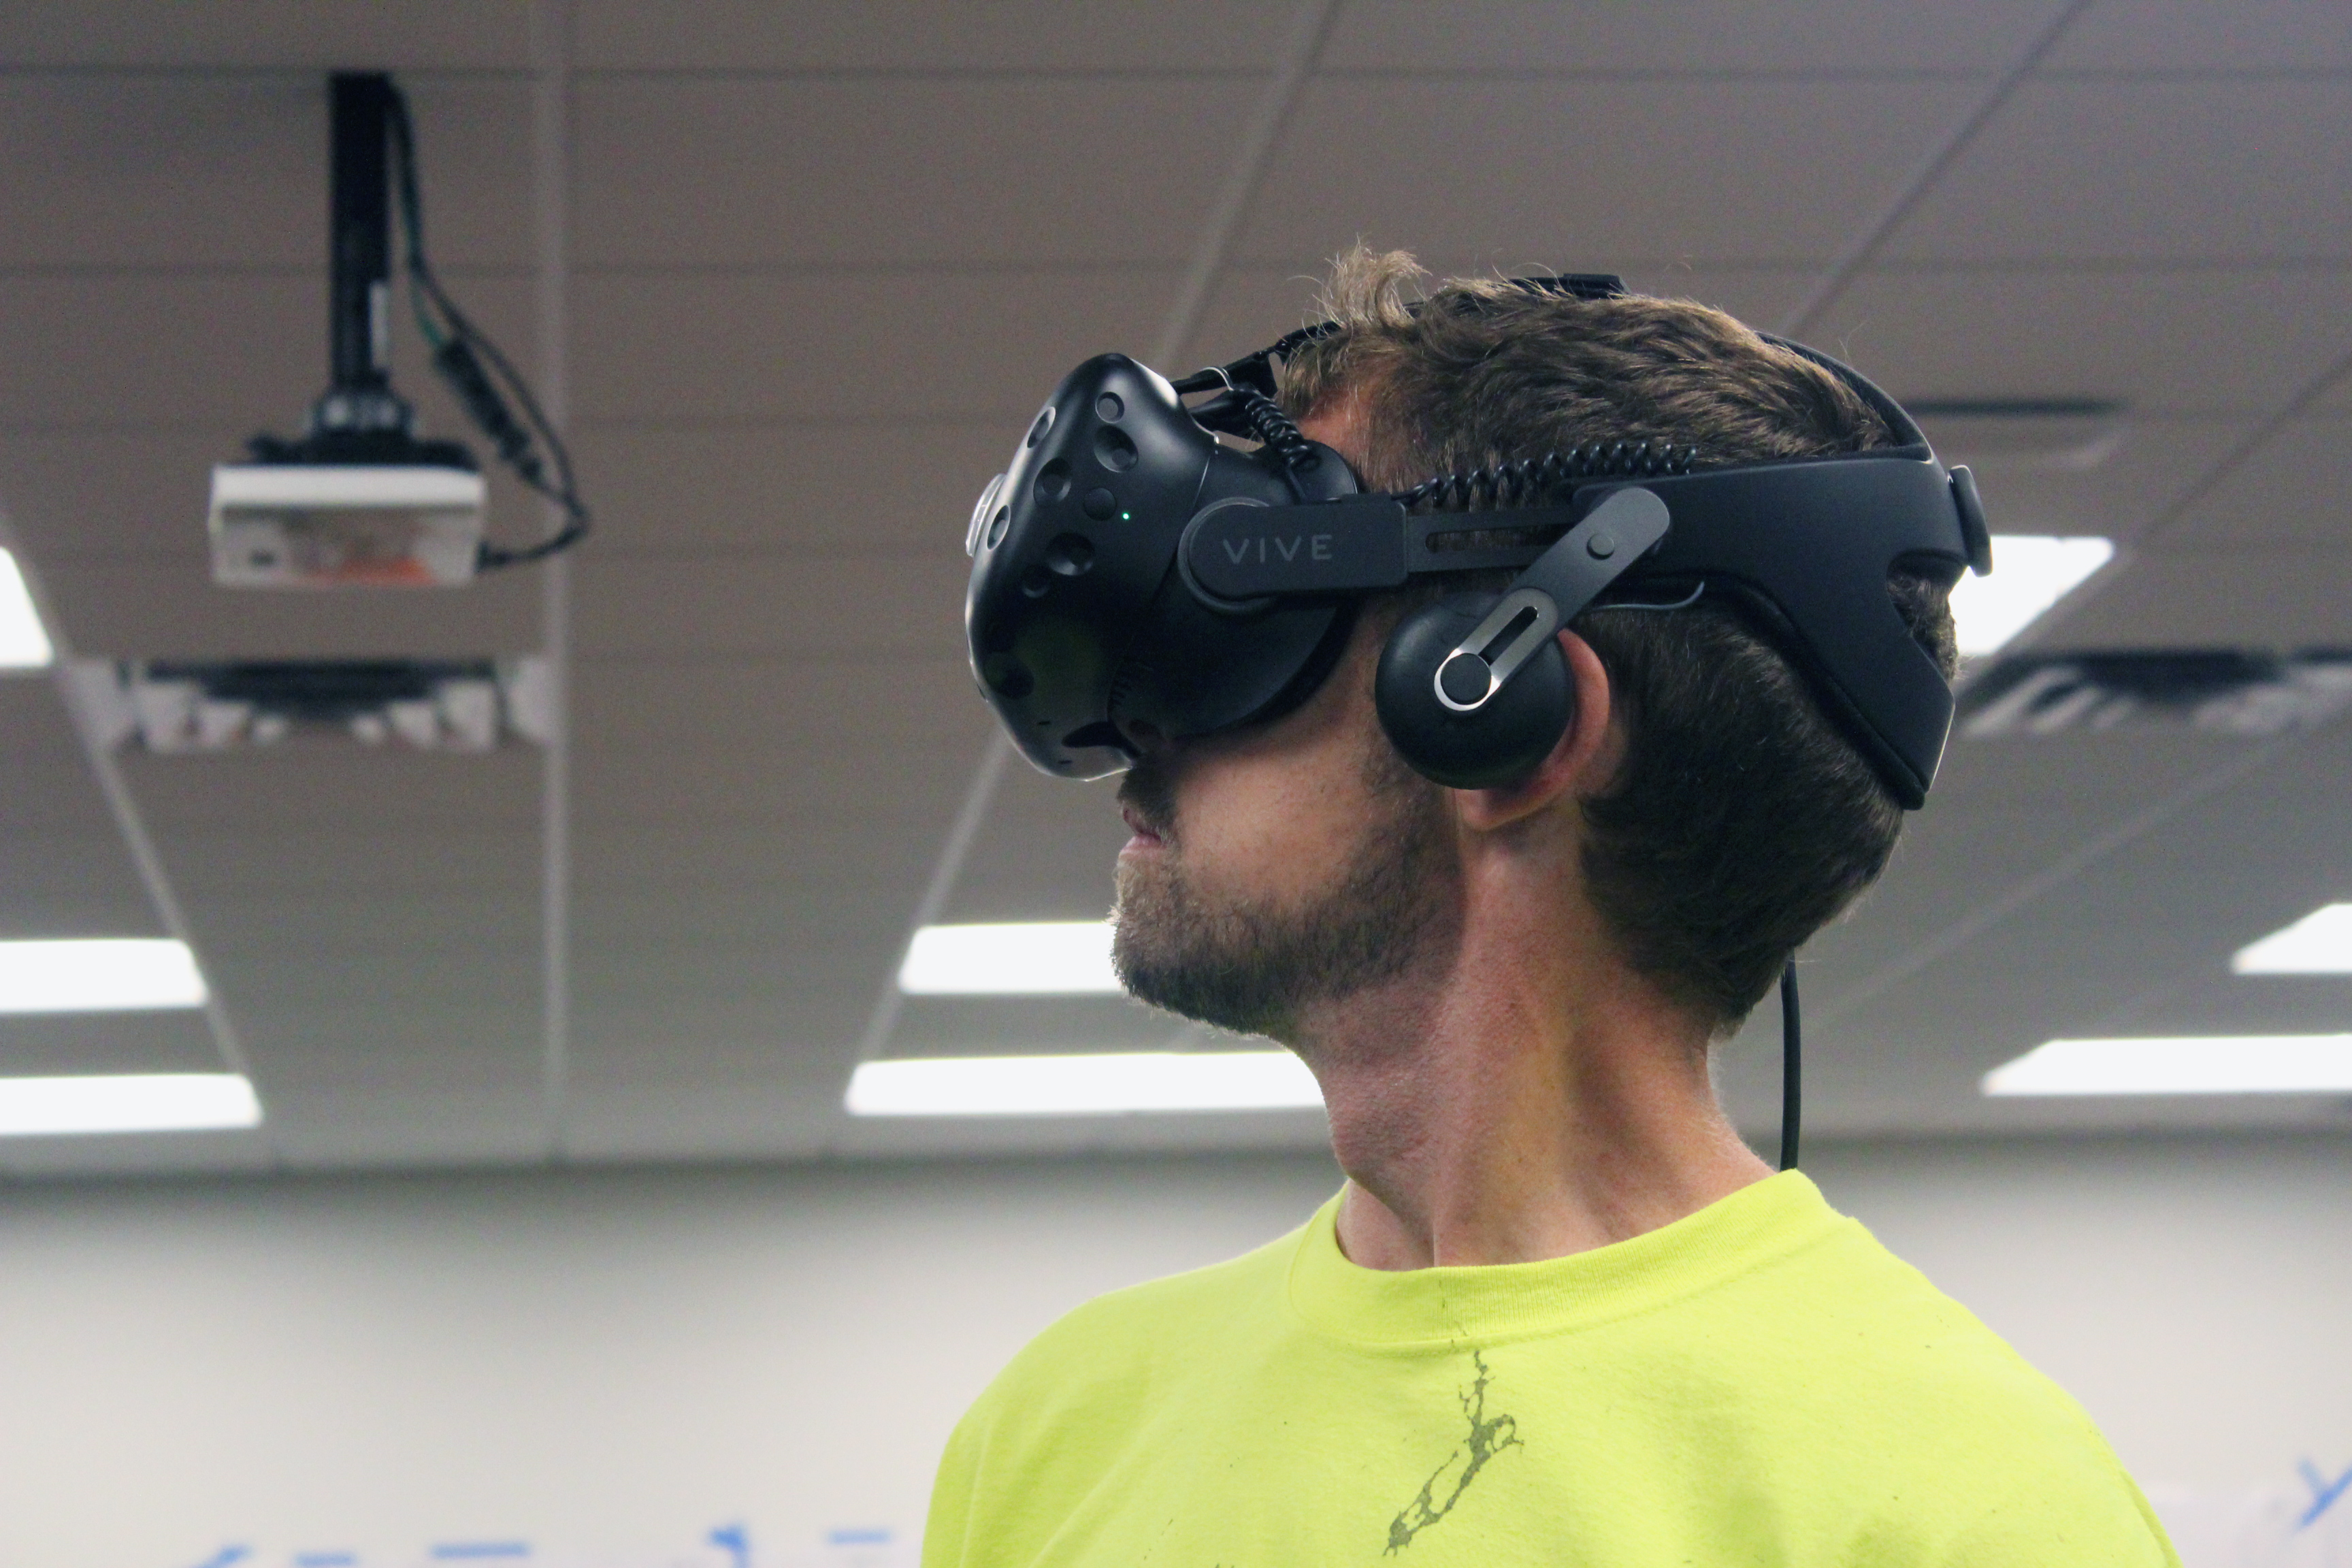 VR headsets can guide users in safety training